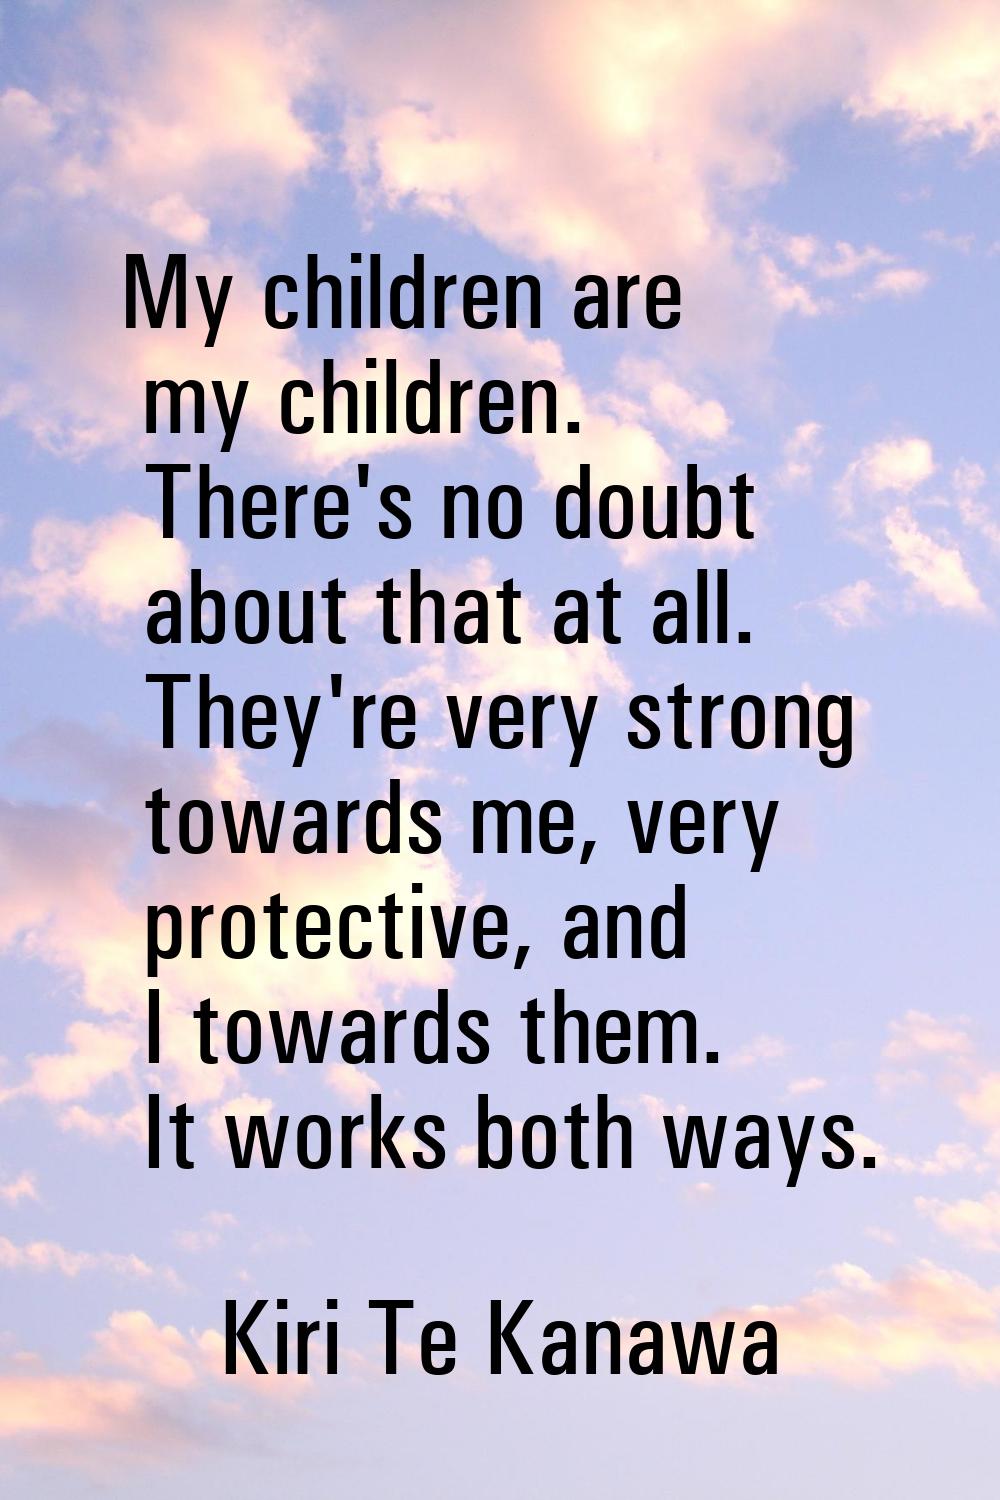 My children are my children. There's no doubt about that at all. They're very strong towards me, ve